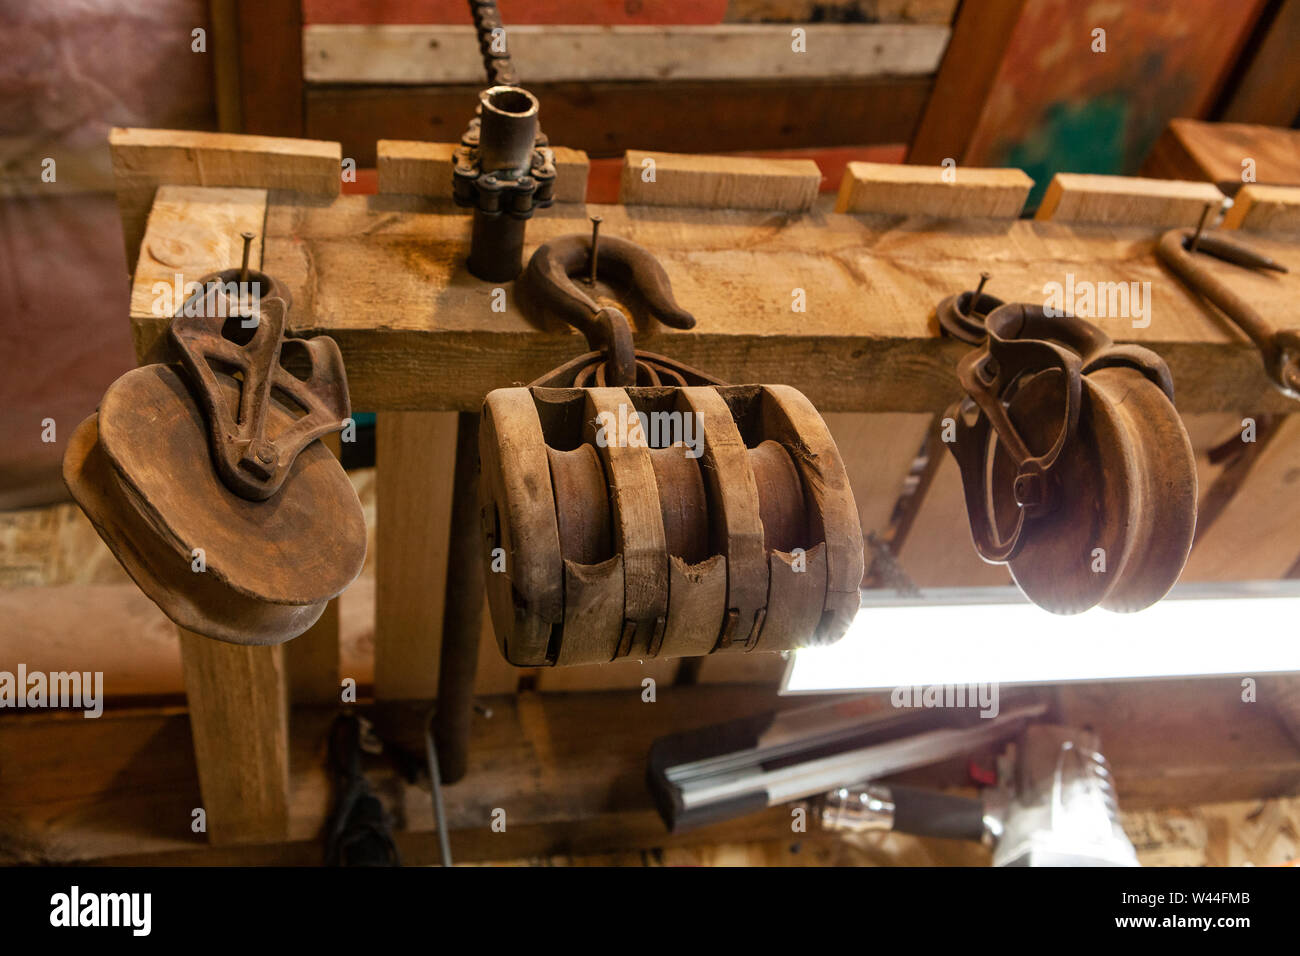 A low angle view of vintage lifting wheels hanging inside a rustic workshop. Traditional lifting mechanisms used in a block and tackle system. Stock Photo